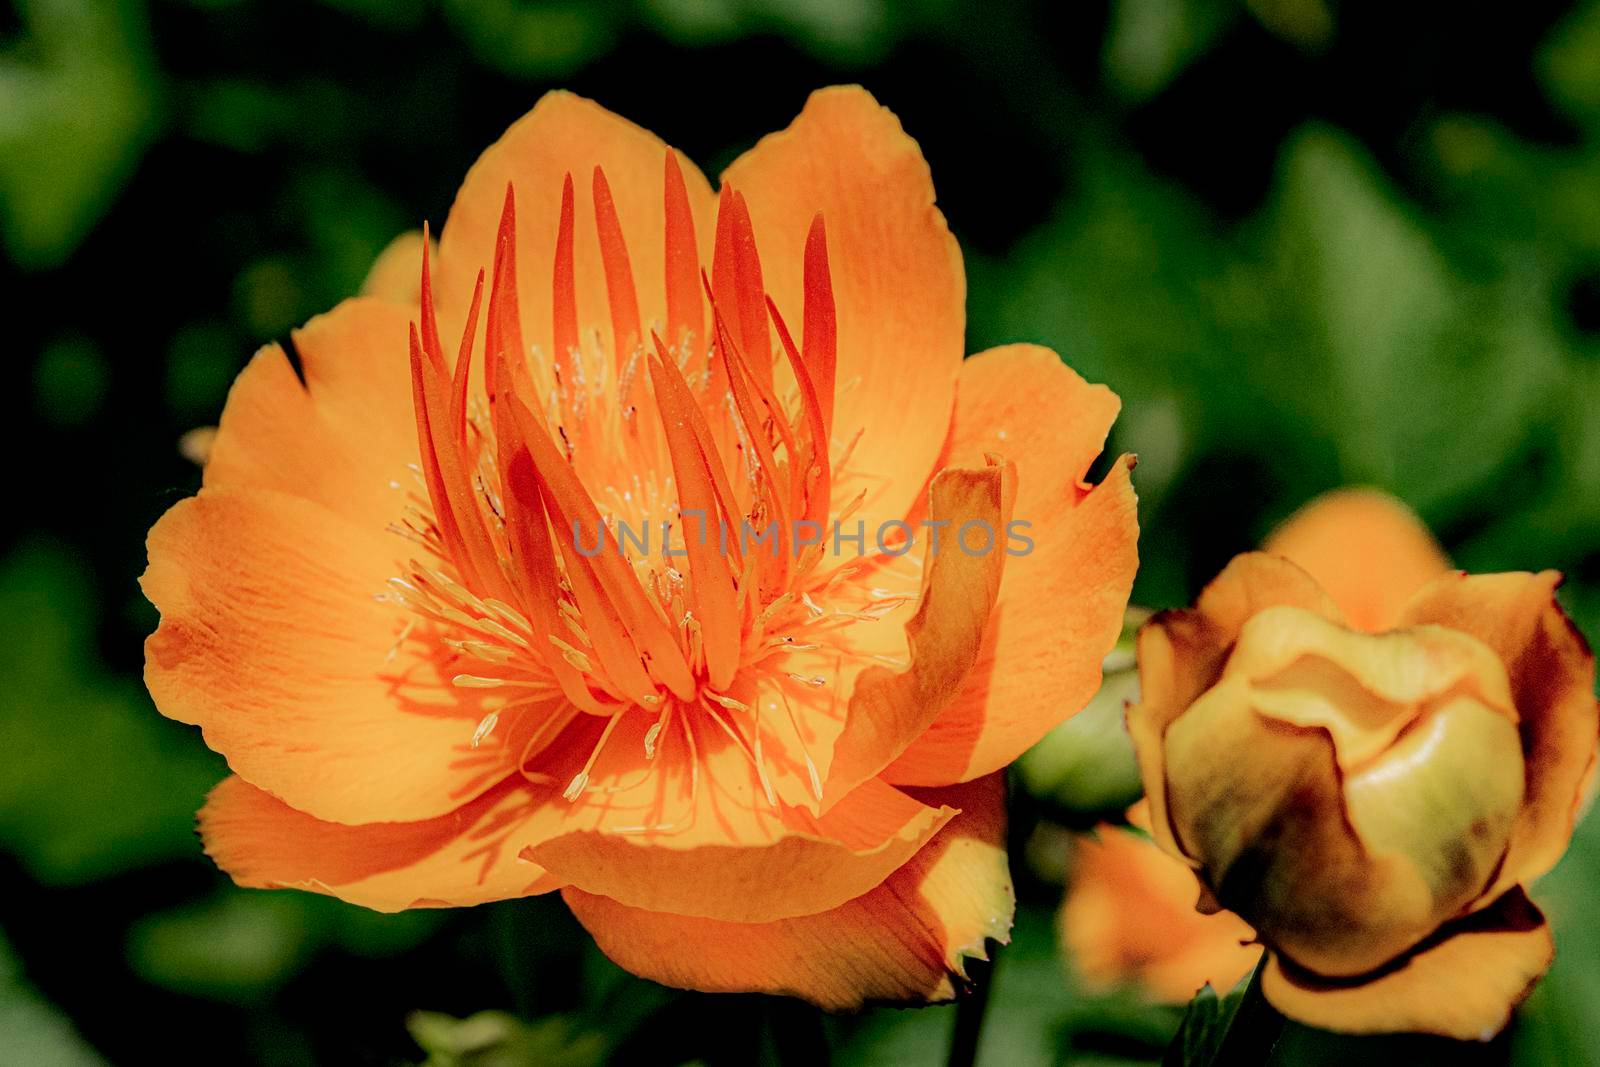 Large open orange Trollius flower as a light against a background of green foliage